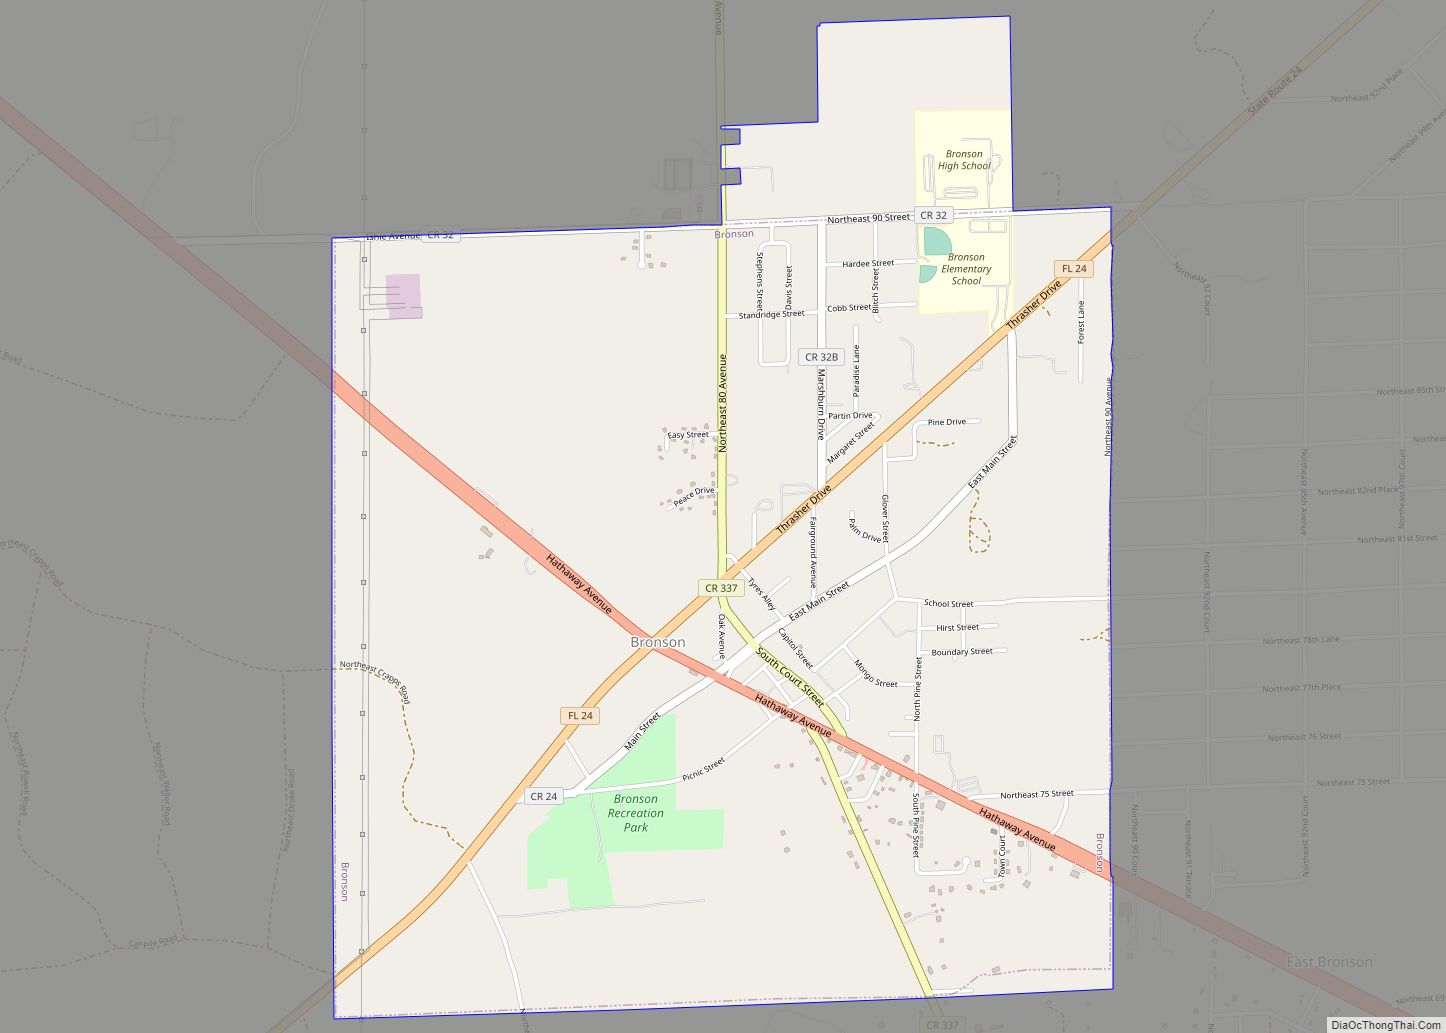 Map of Bronson town